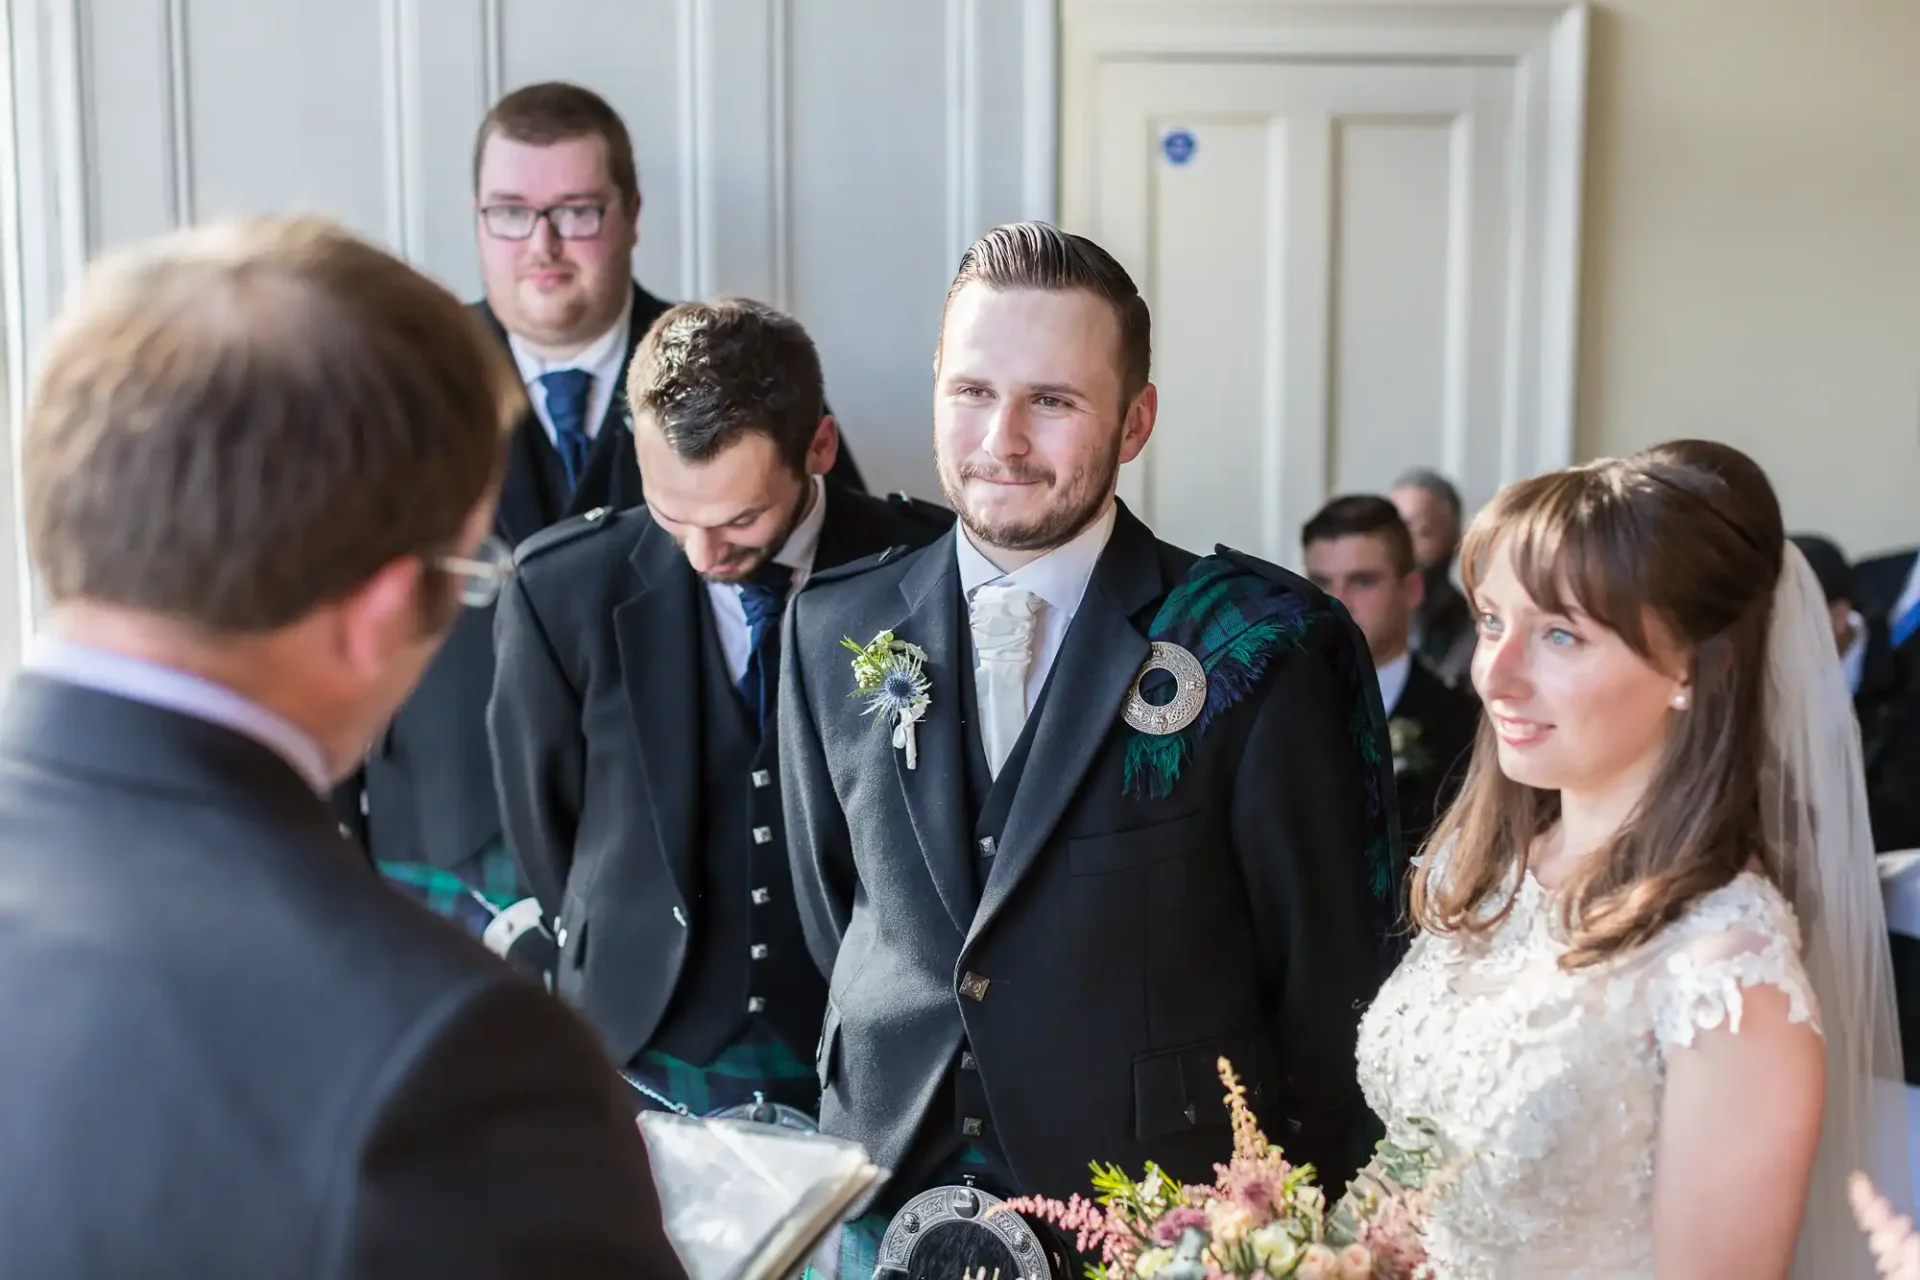 A groom smiling at a speaker during a wedding ceremony, with a bride and groomsmen in background, all dressed formally.